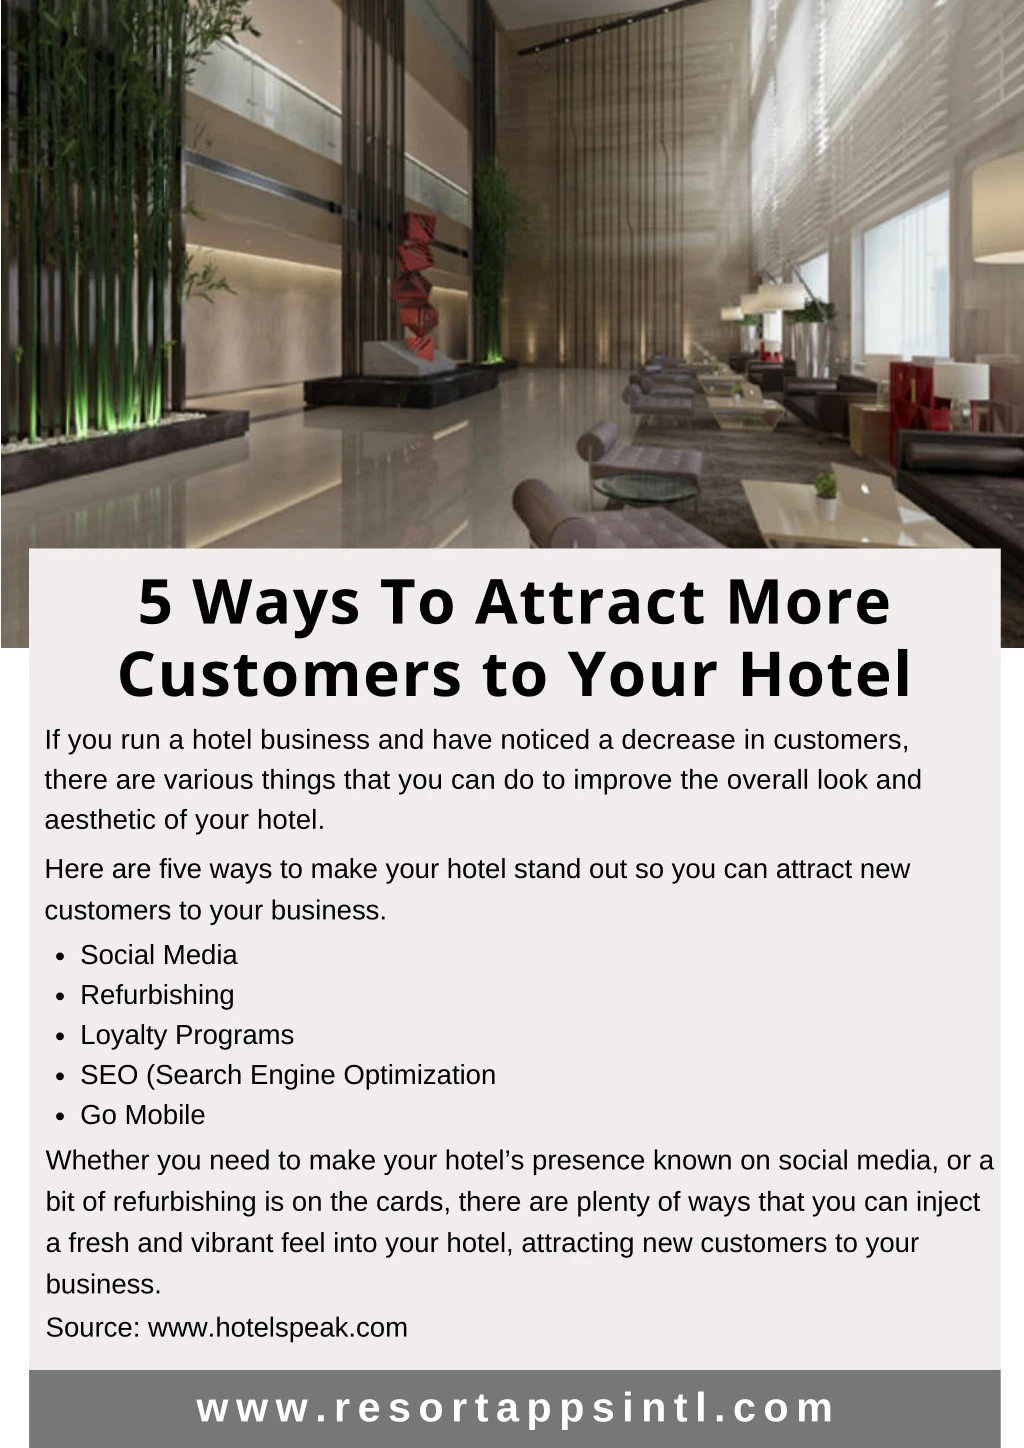 5 ways to attract more customers to your hotel